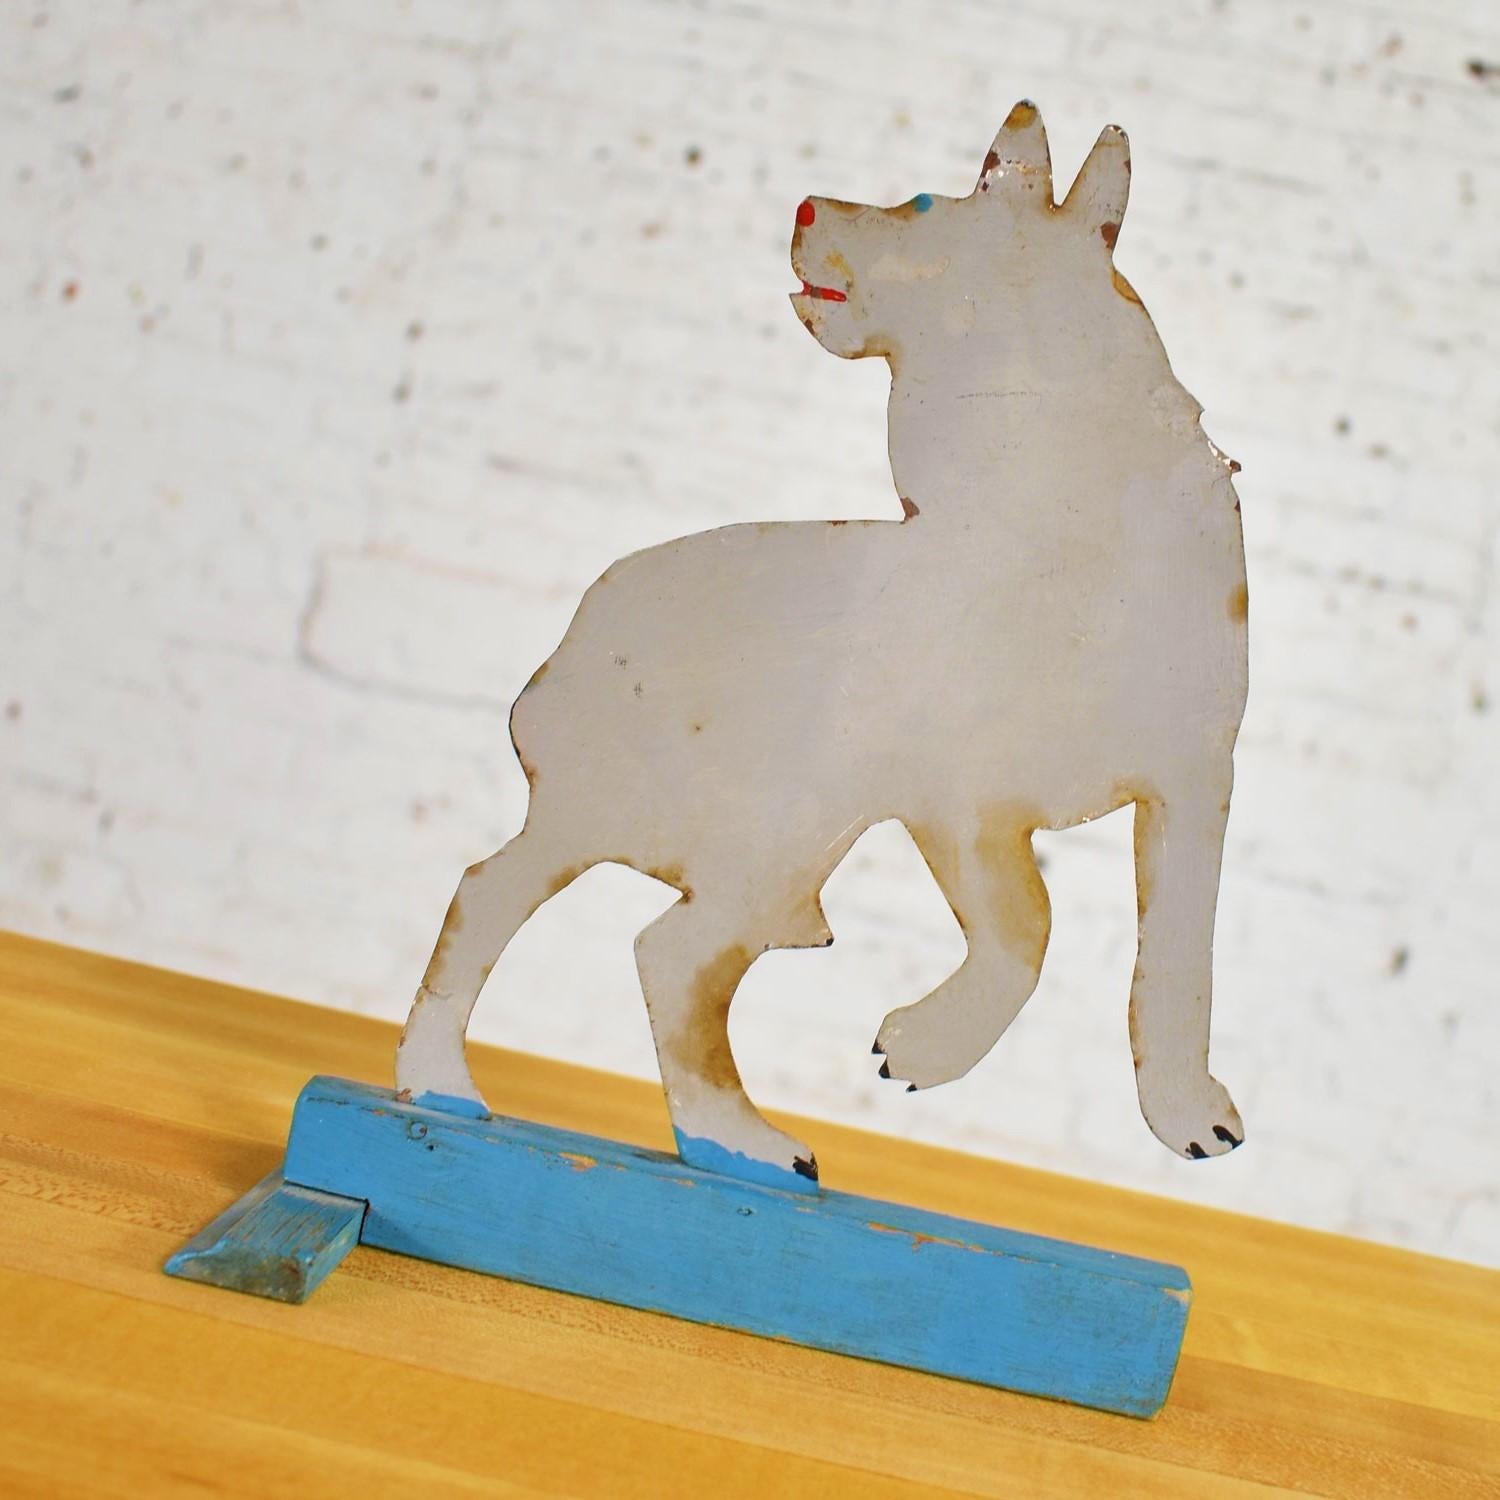 Incredible antique Folk Art tin cutout sculpture of a dog or a wolf. It is hand painted and on a painted wood T-shaped base. It is in wonderful vintage condition with lots of great patina including rust and chipping paint. Please see photos, circa